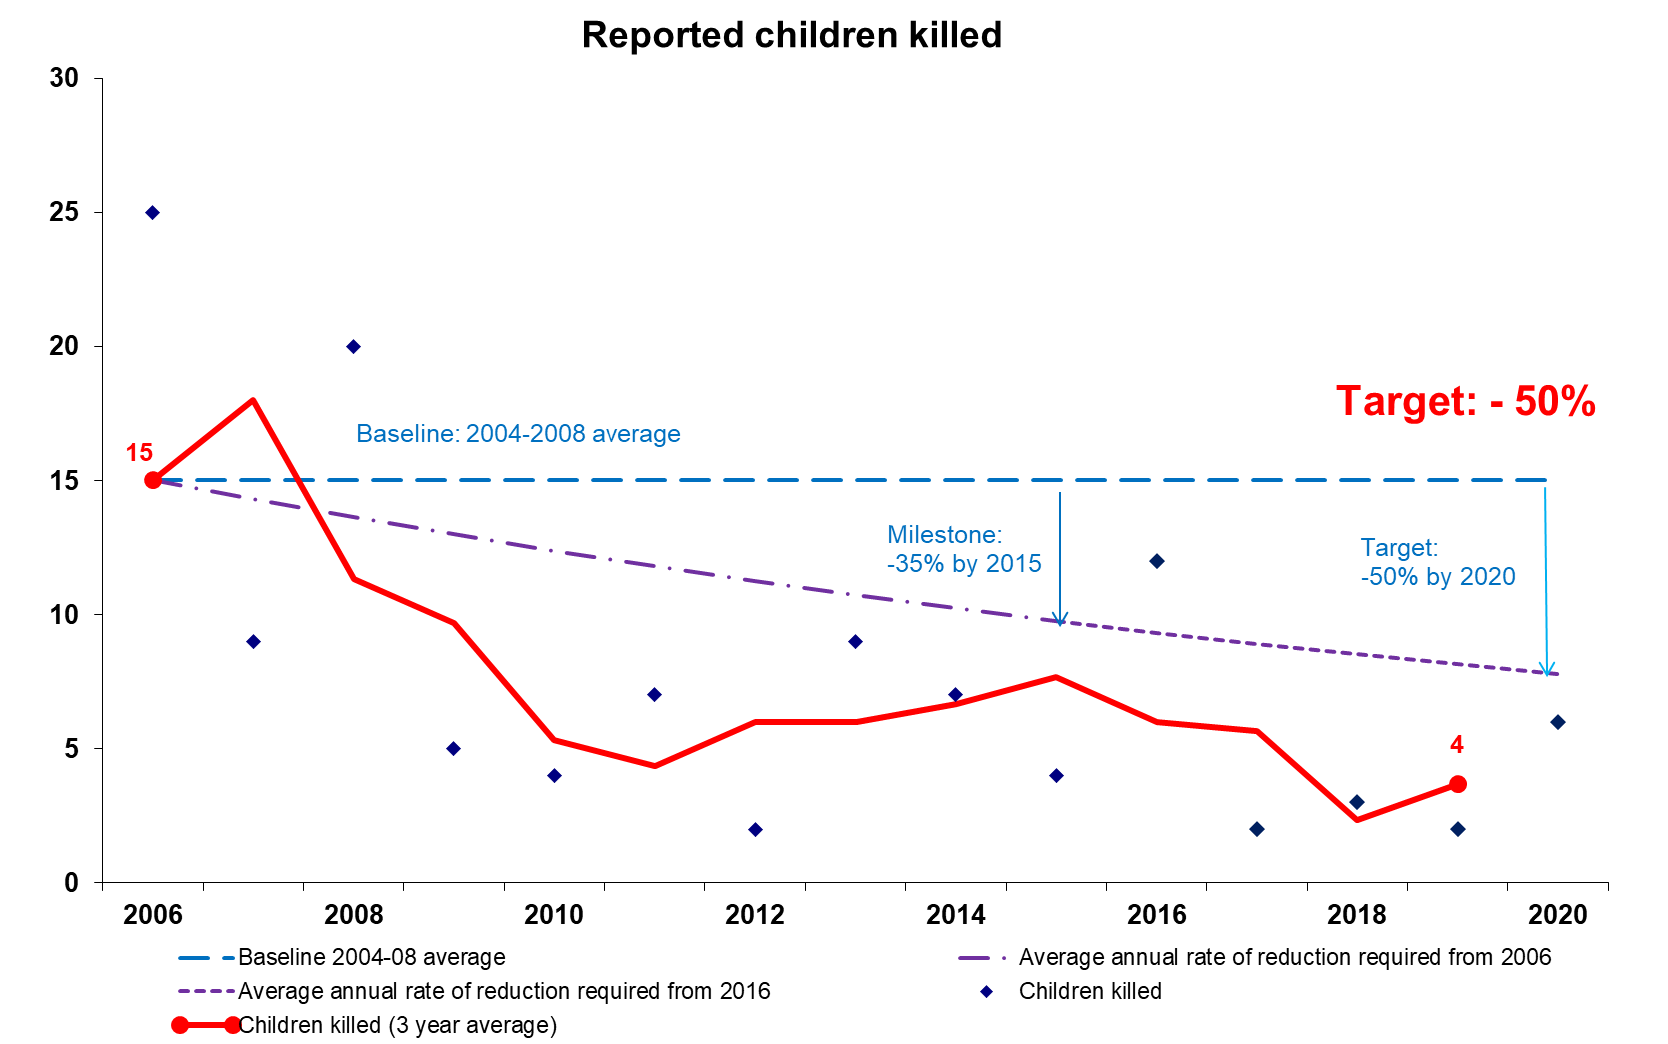 6 children were reported as killed in 2020, meaning the average for the 2018- 2020 period was 4 a year, this is 76 per cent (11) below the 2004-2008 average of 15. Figure 5 shows that the reduction has exceeded the 2020 target.